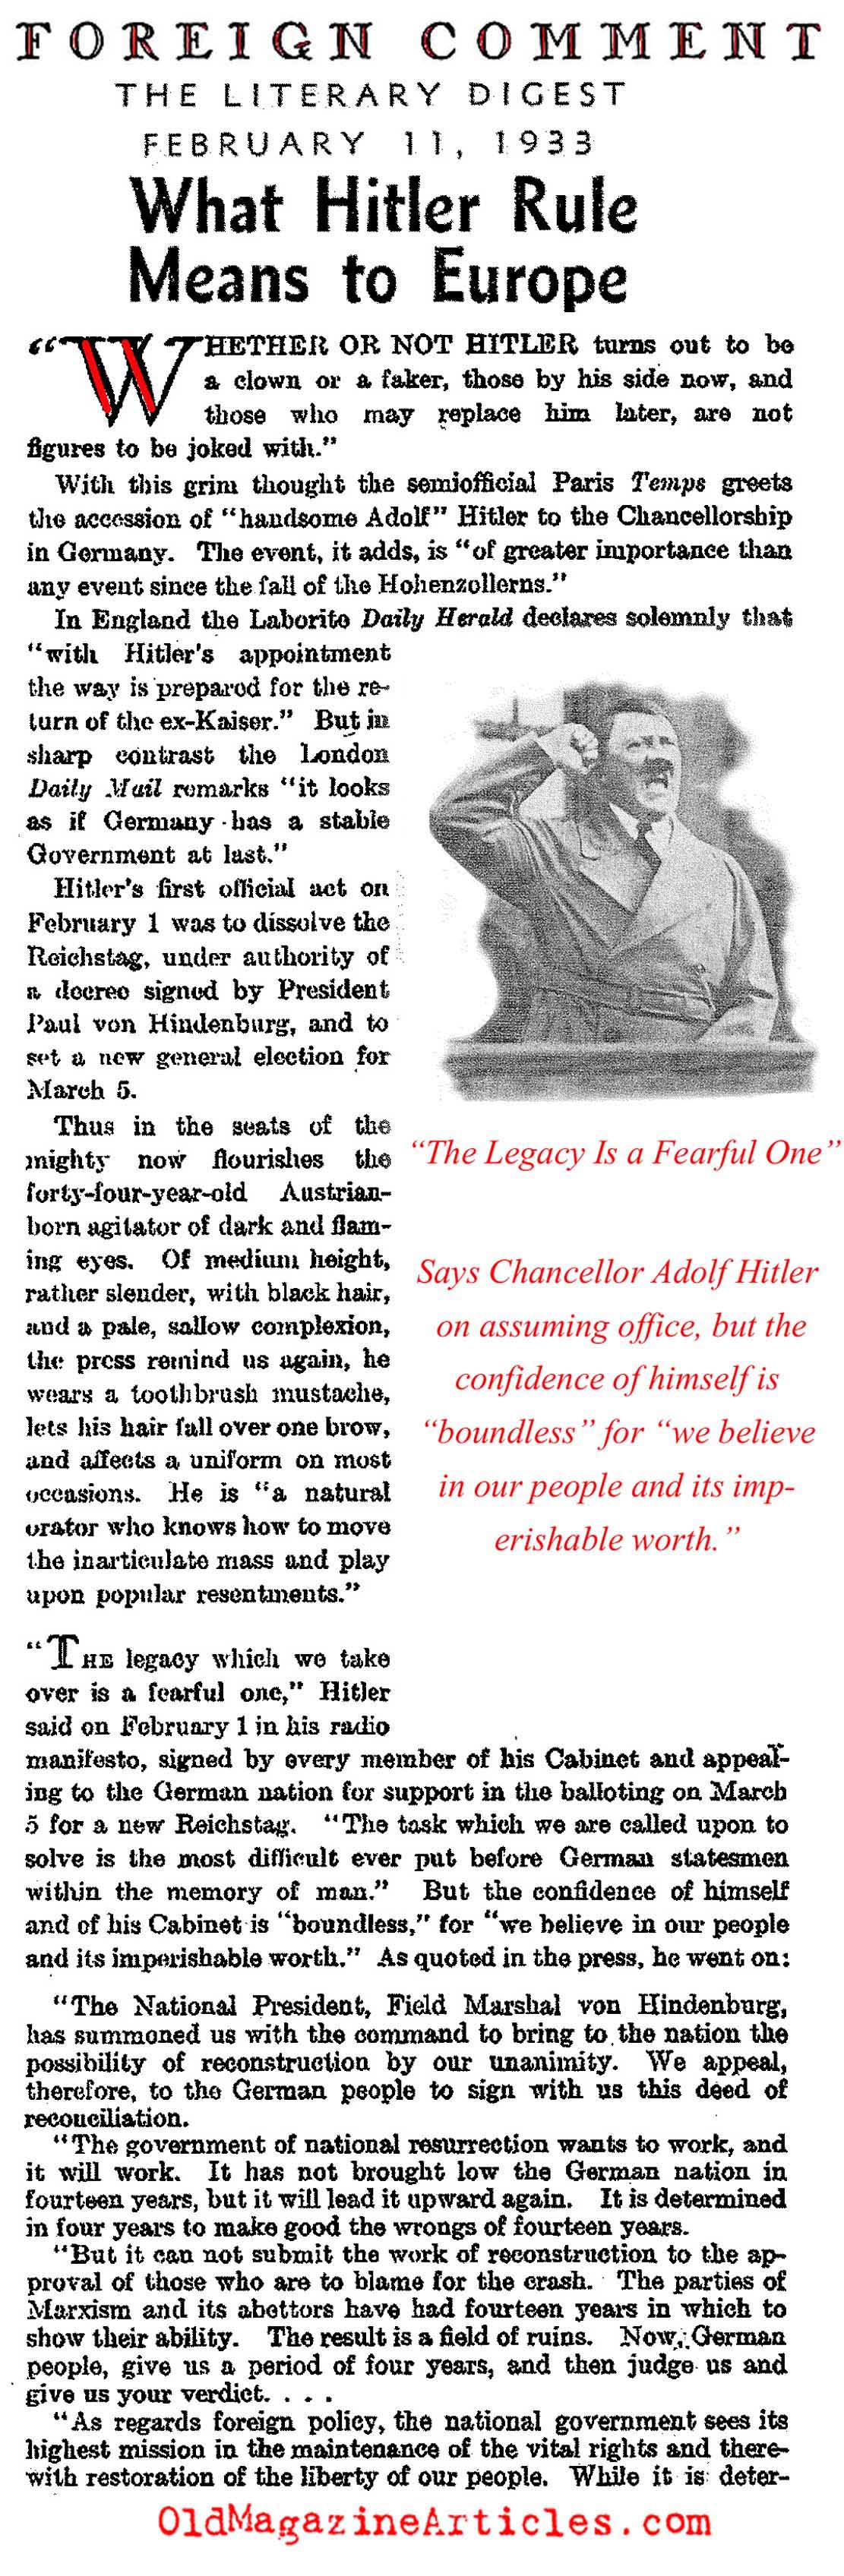 1933: Hitler Comes to Power (Literary Digest, 1933)